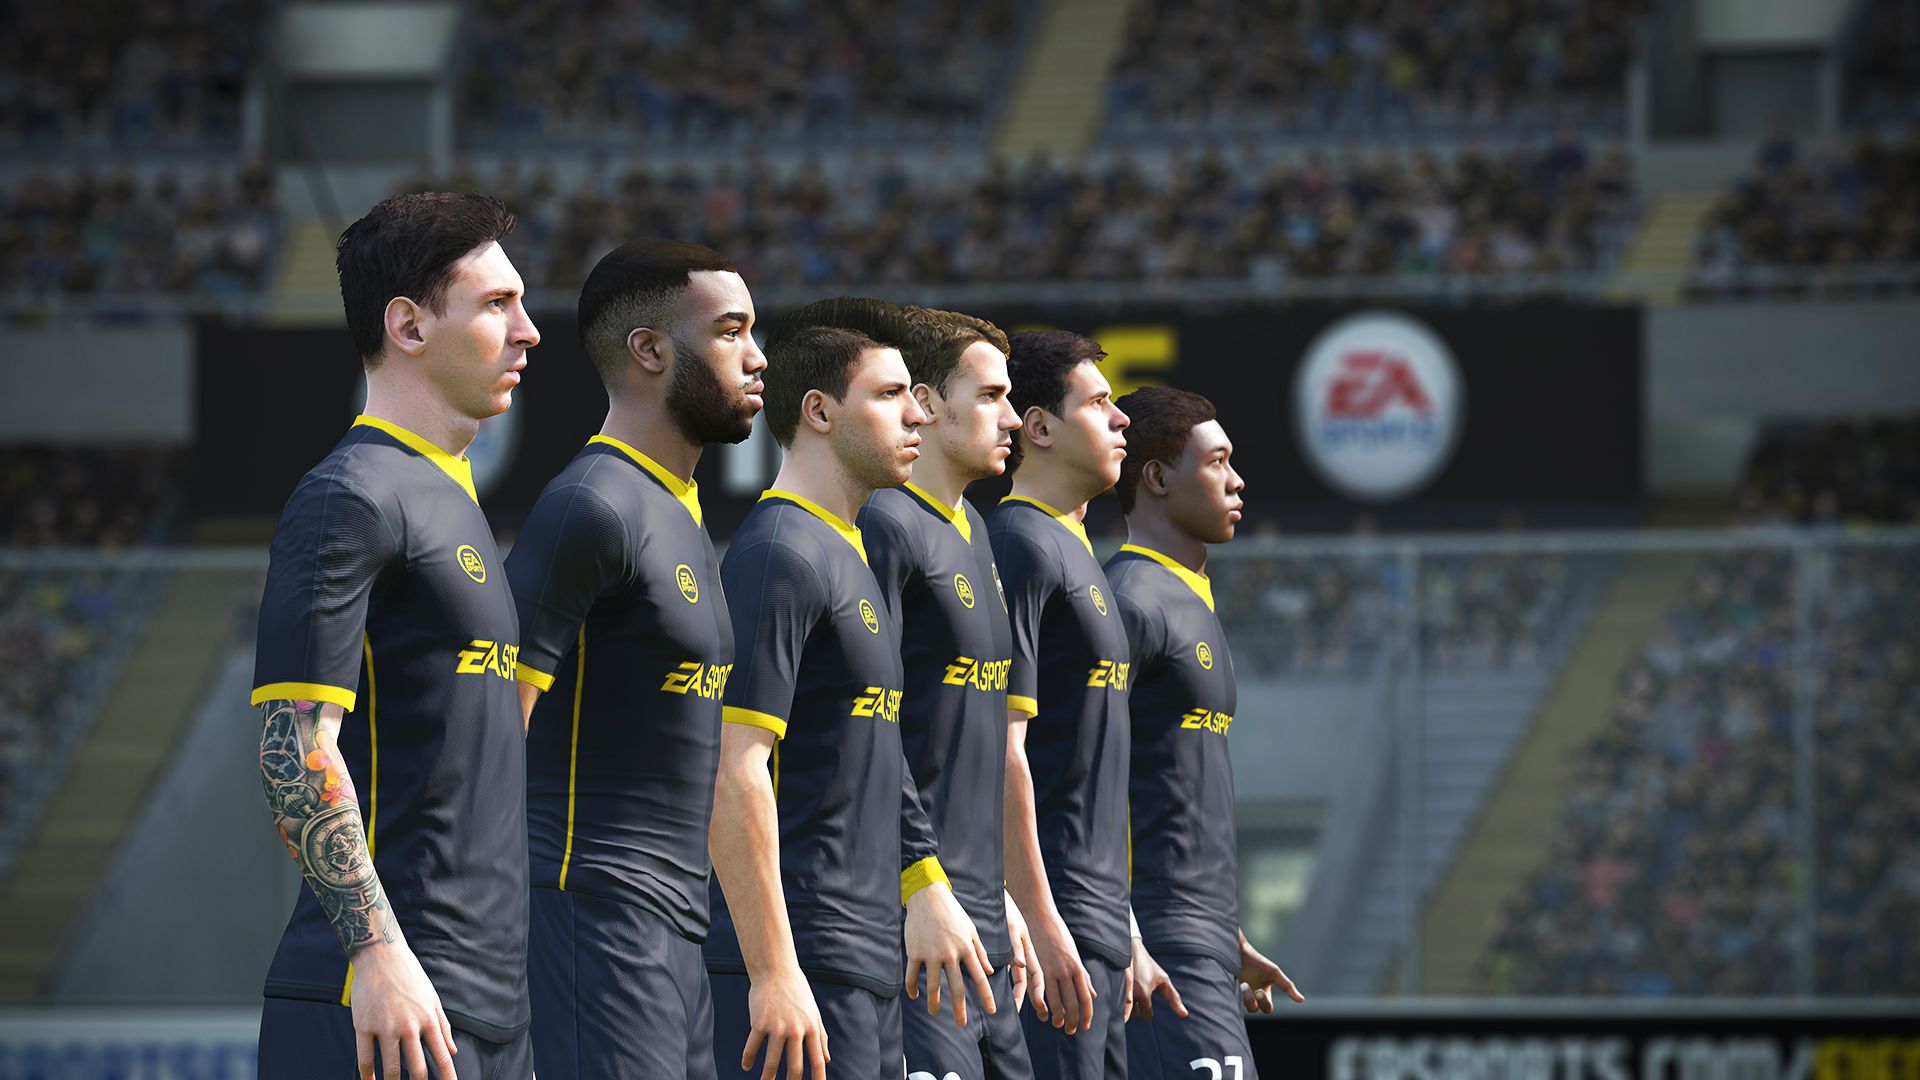 Find the best laptops for FIFA 16